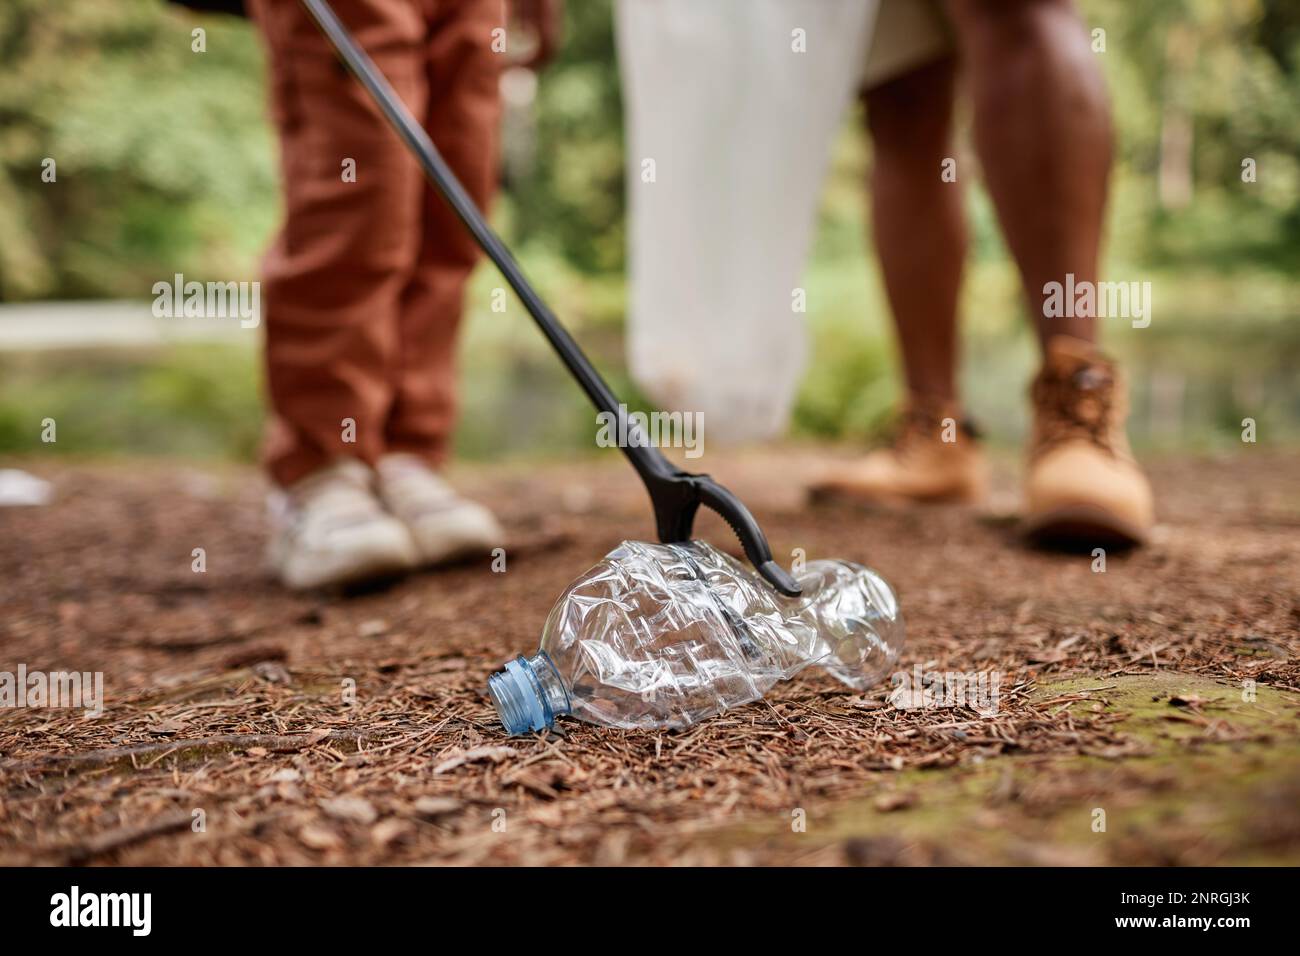 Close up of child picking up plastic bottle outdoors in nature, copy space Stock Photo